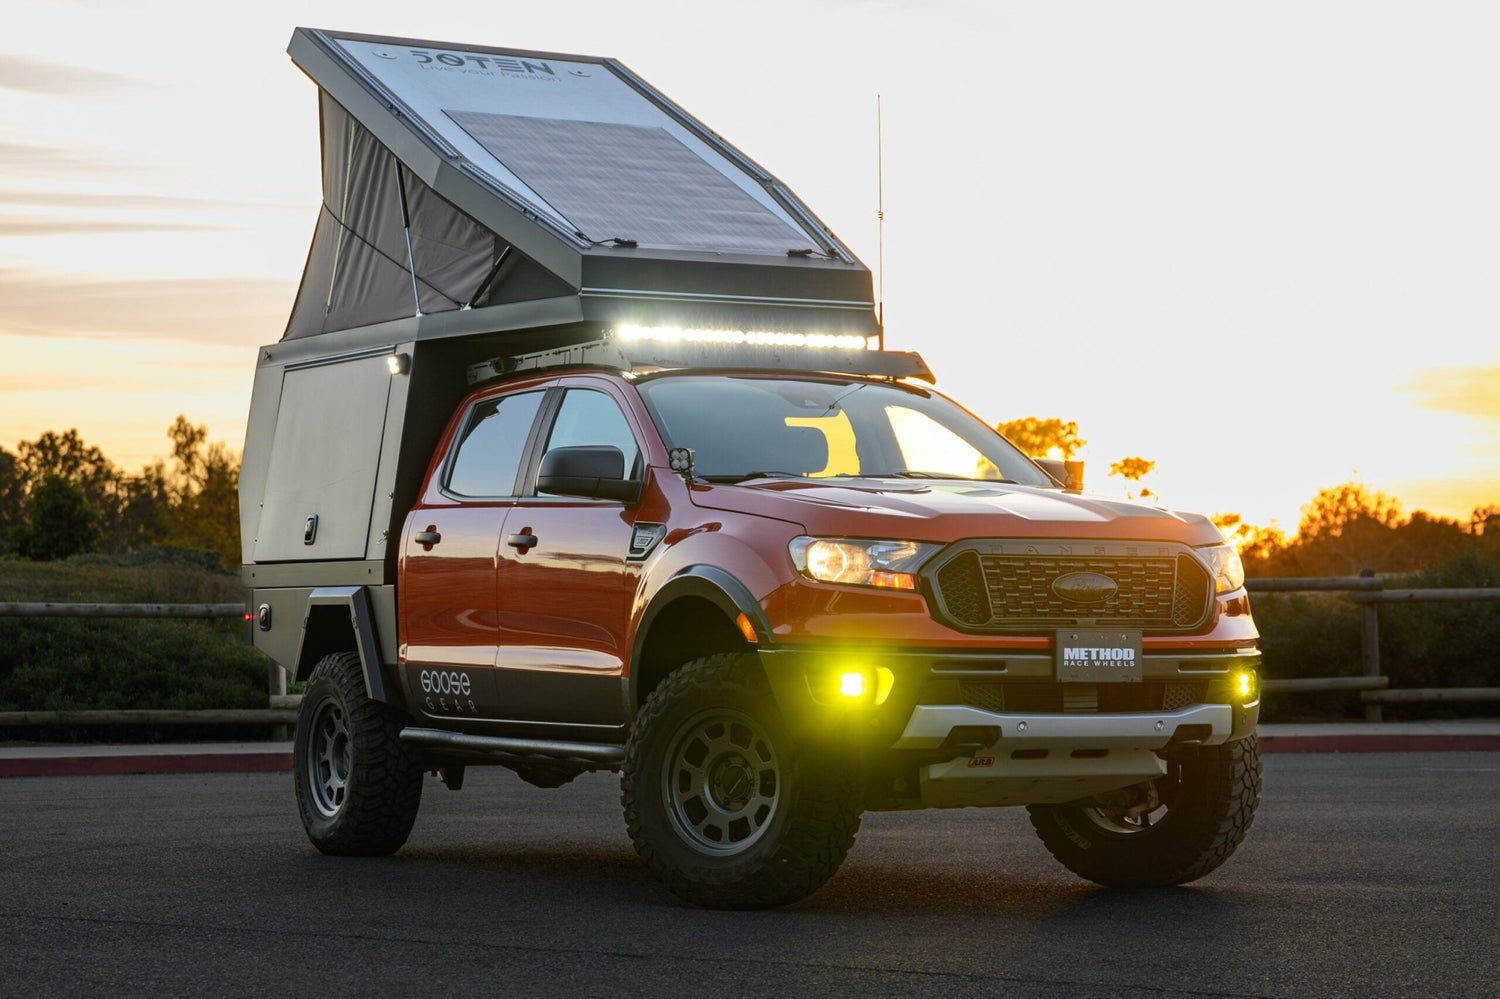 Goose Gear 2019 Ford Ranger :: Featured Classified - Goose Gear